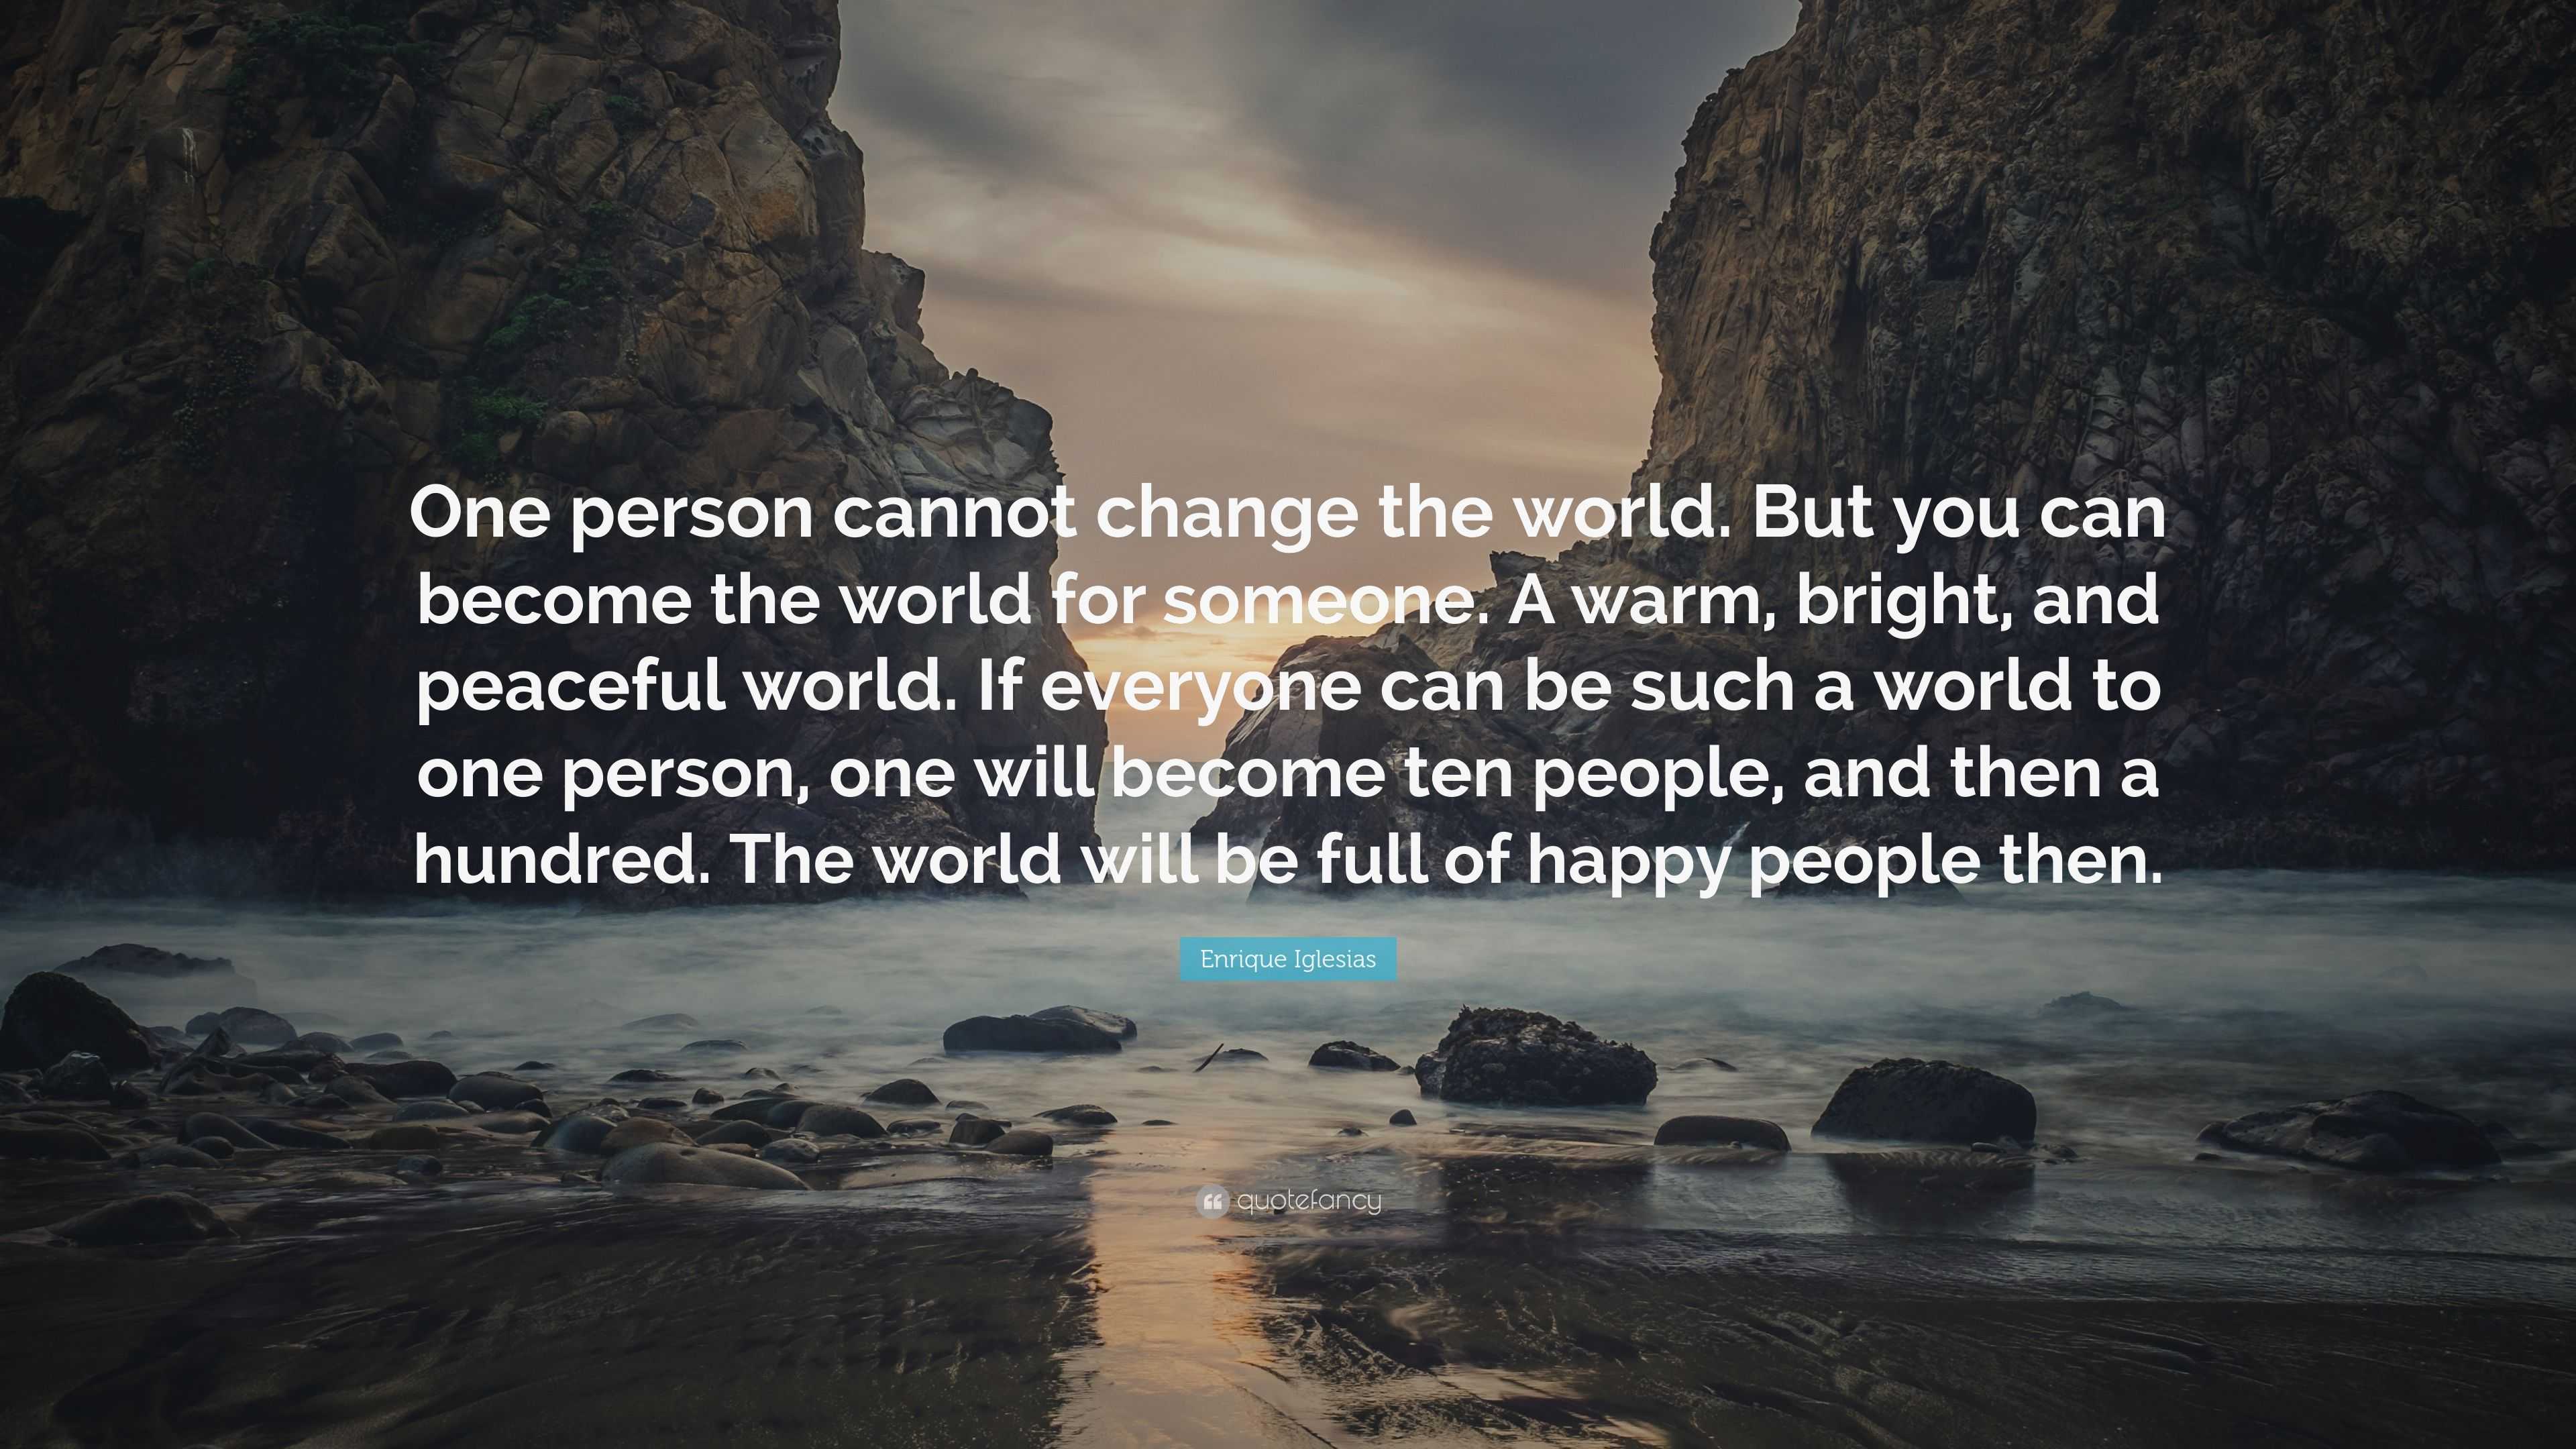 how can one person change the world essay